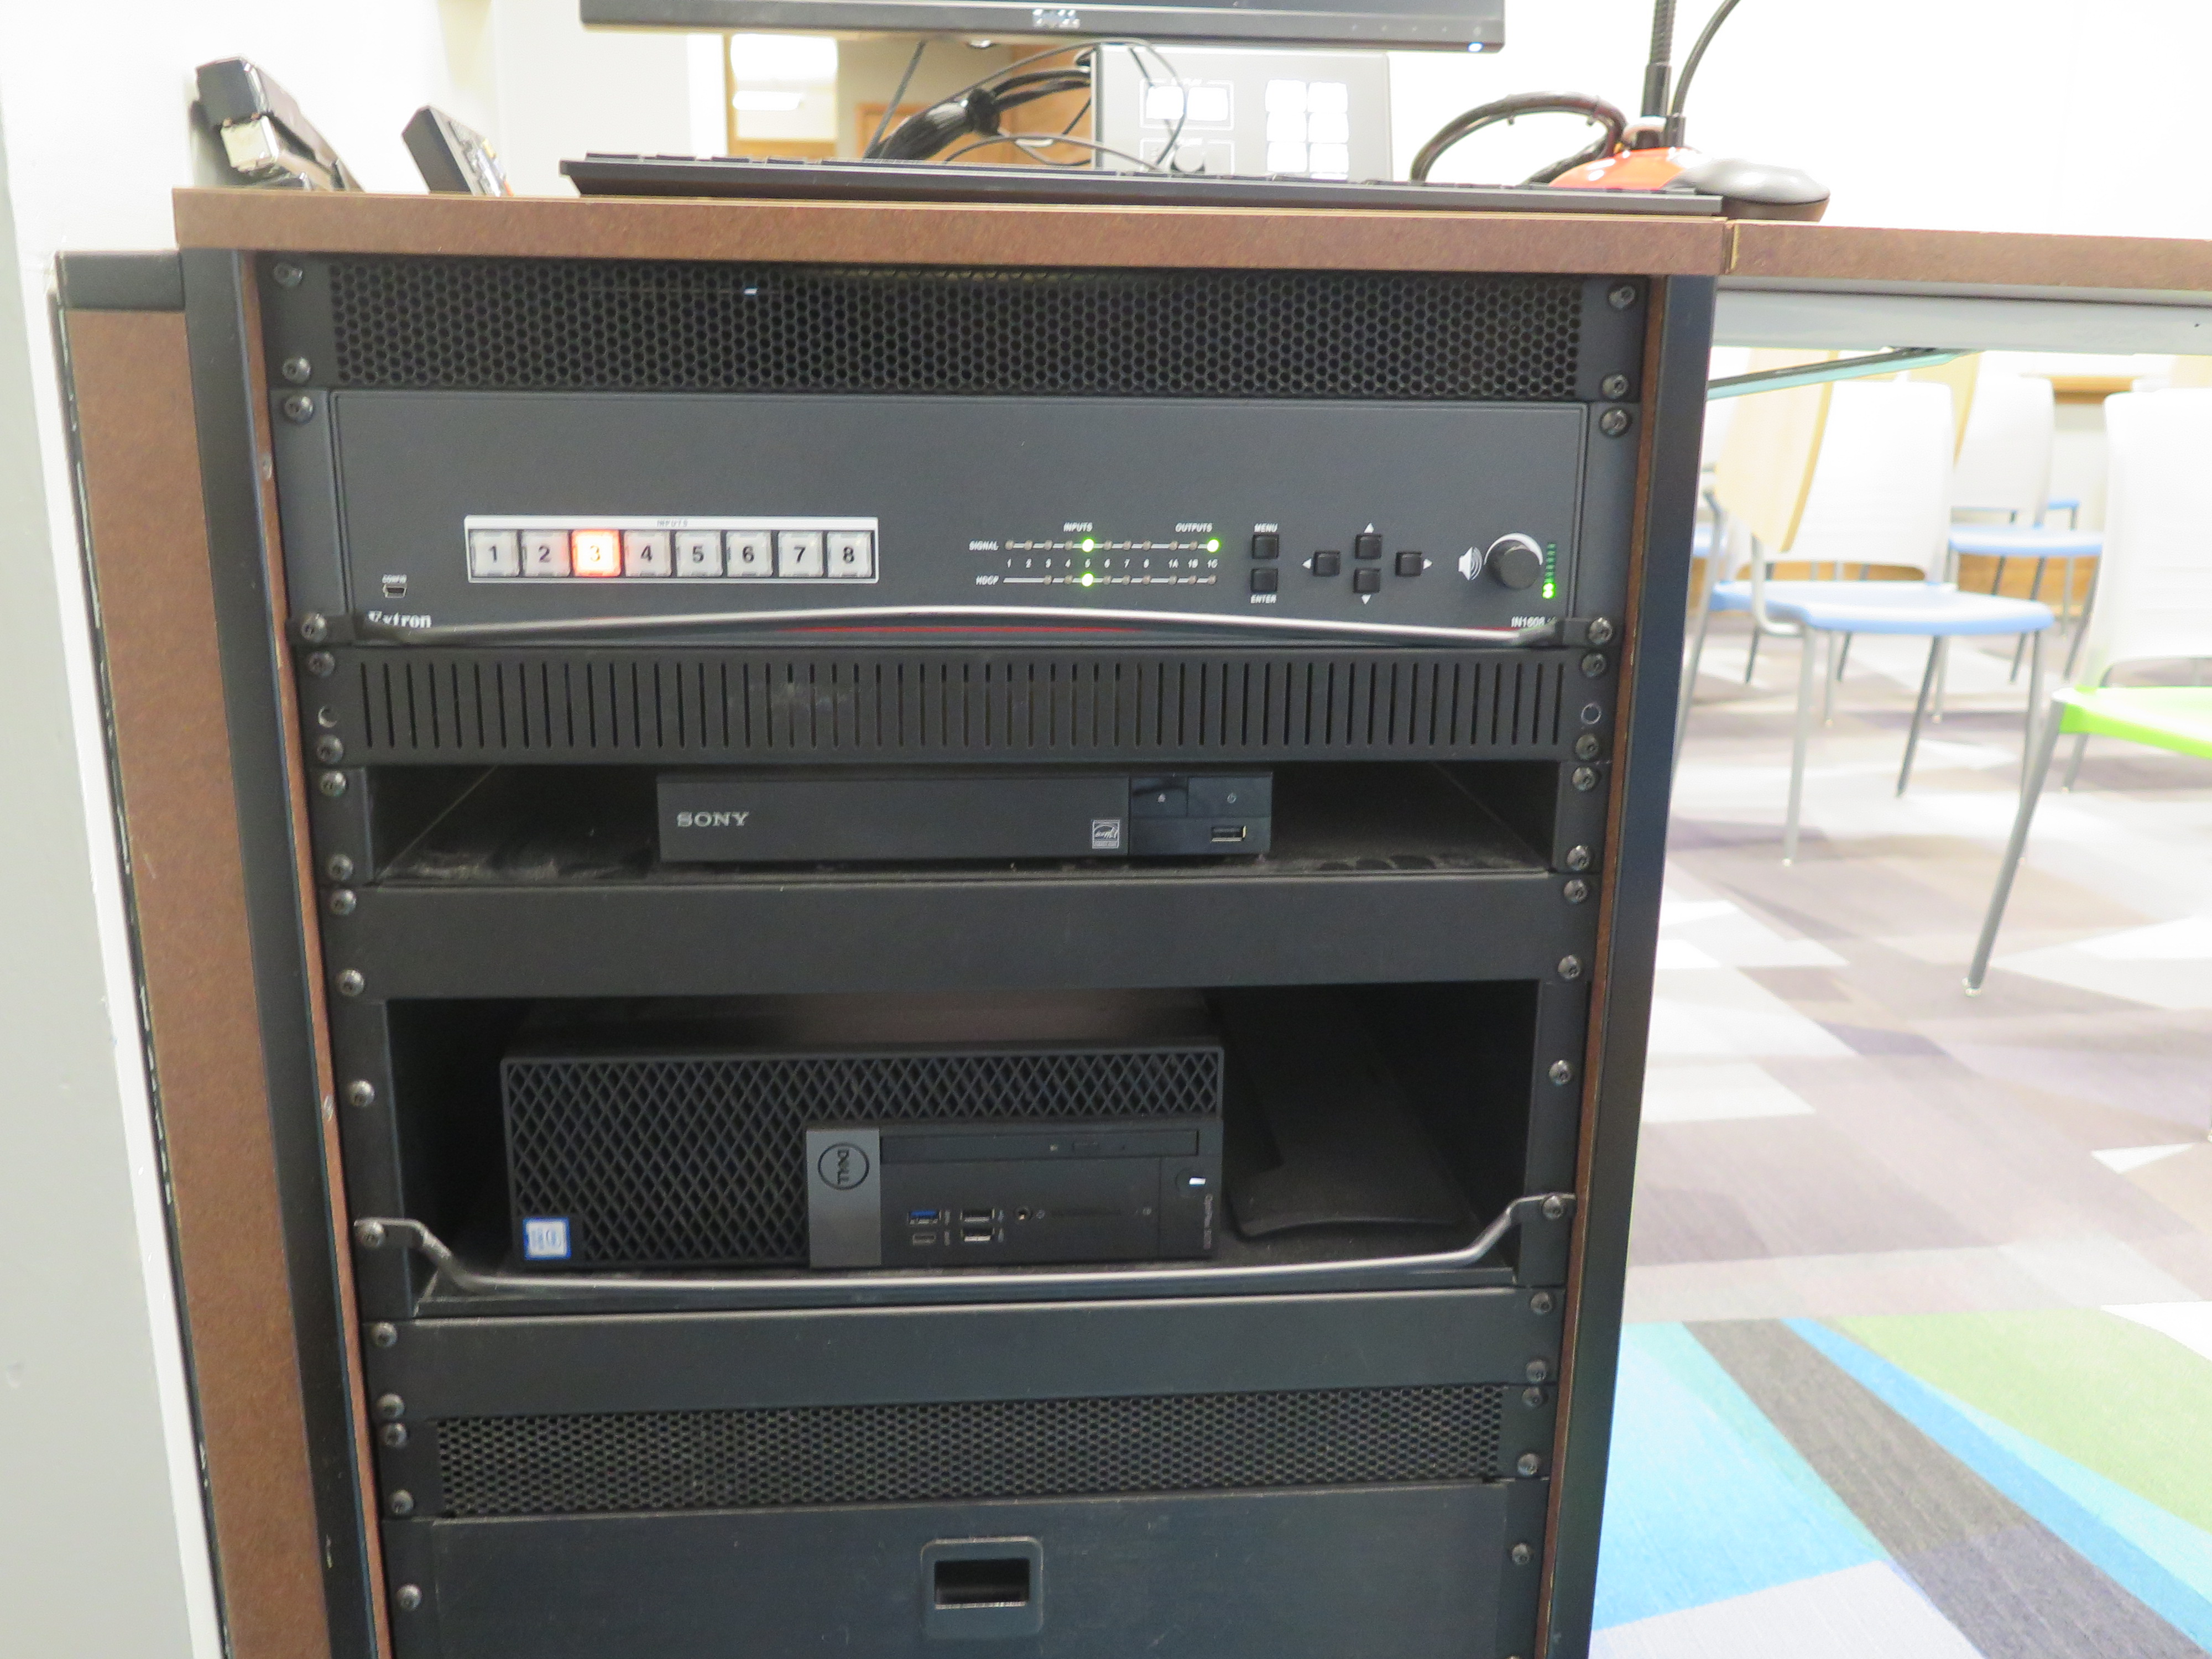 Front of Equipment rack showing AV Switcher. Below that is Blue-Ray/DVD Player. On the bottom is the the Dell Computer CPU.